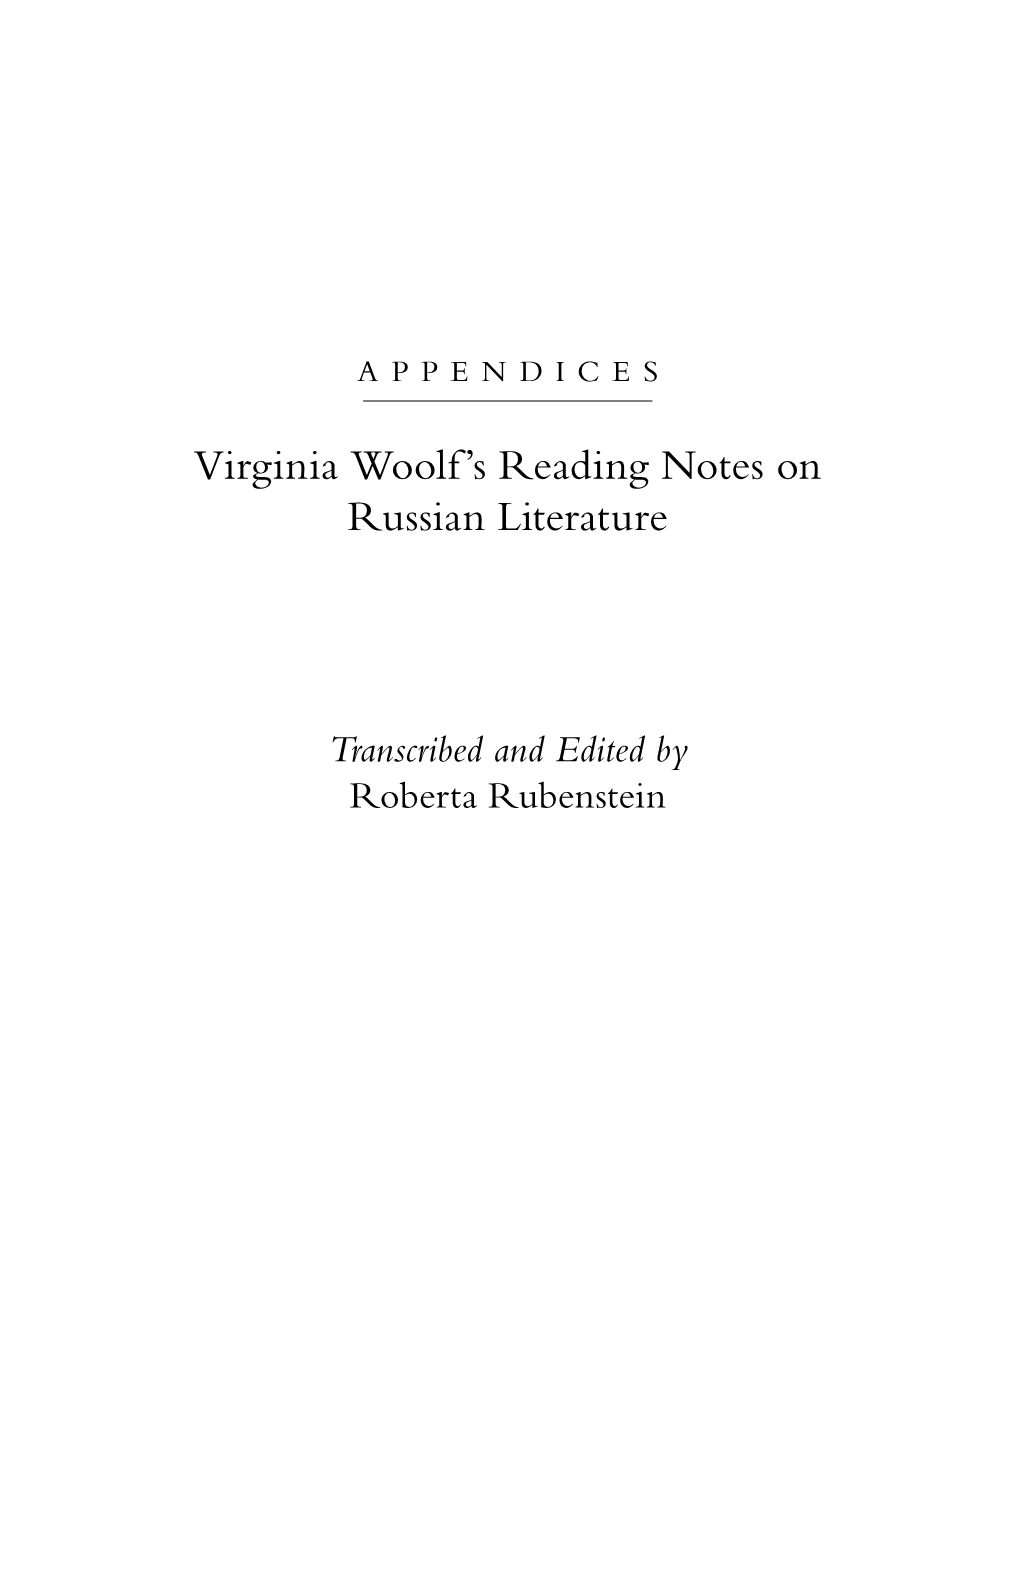 Virginia Woolf's Reading Notes on Russian Literature